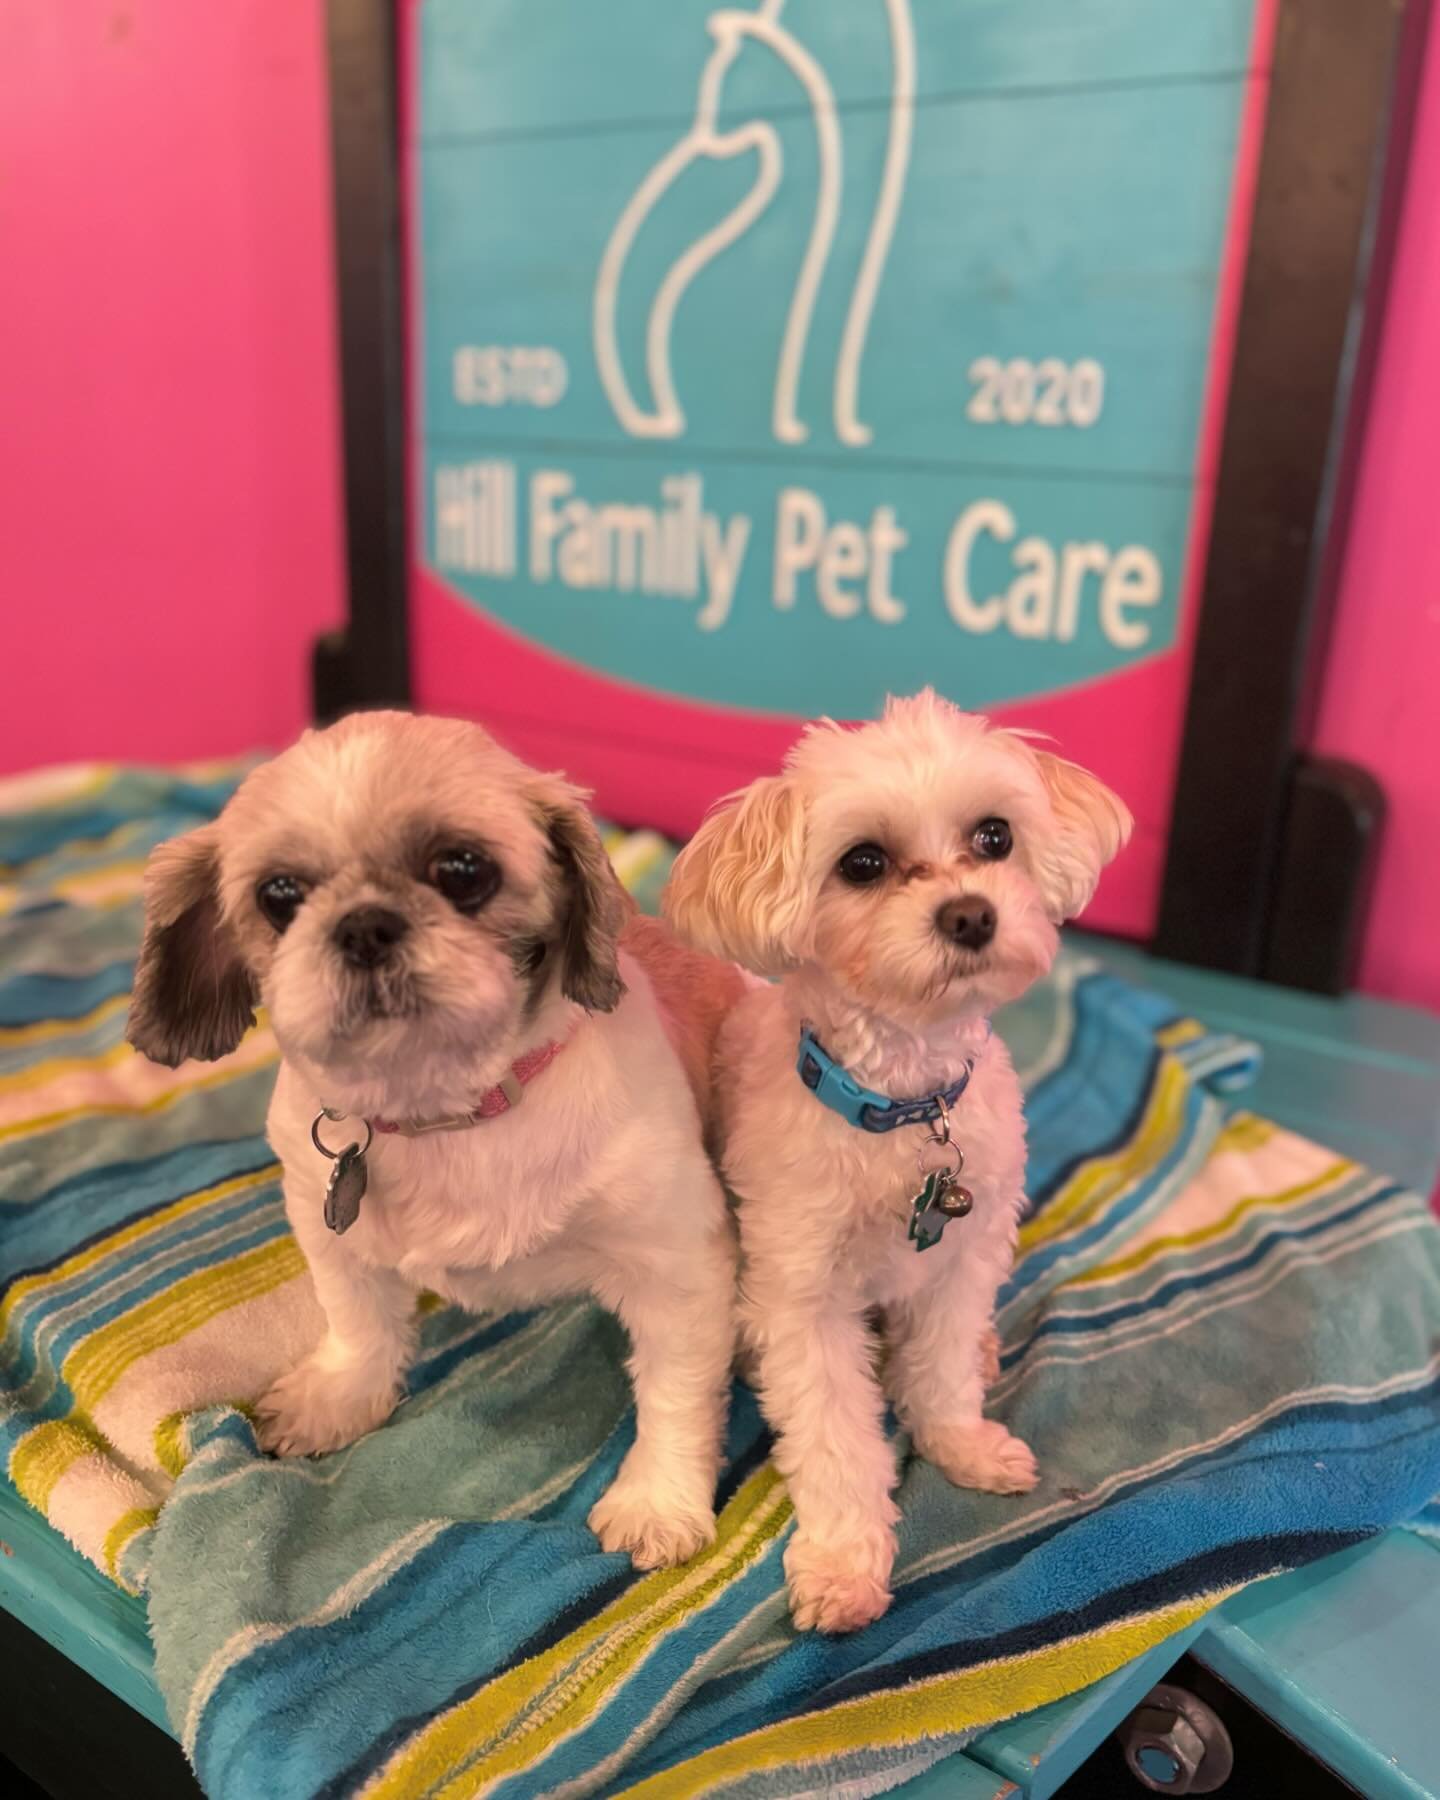 Sundays are for the pups and the pups only 🐶💕

🐶💕🐶💕

#hfpc #doggydaycare #puppies #sundayfunday #dogsofinstagram #dogsofchicago #pawtytime #doglover